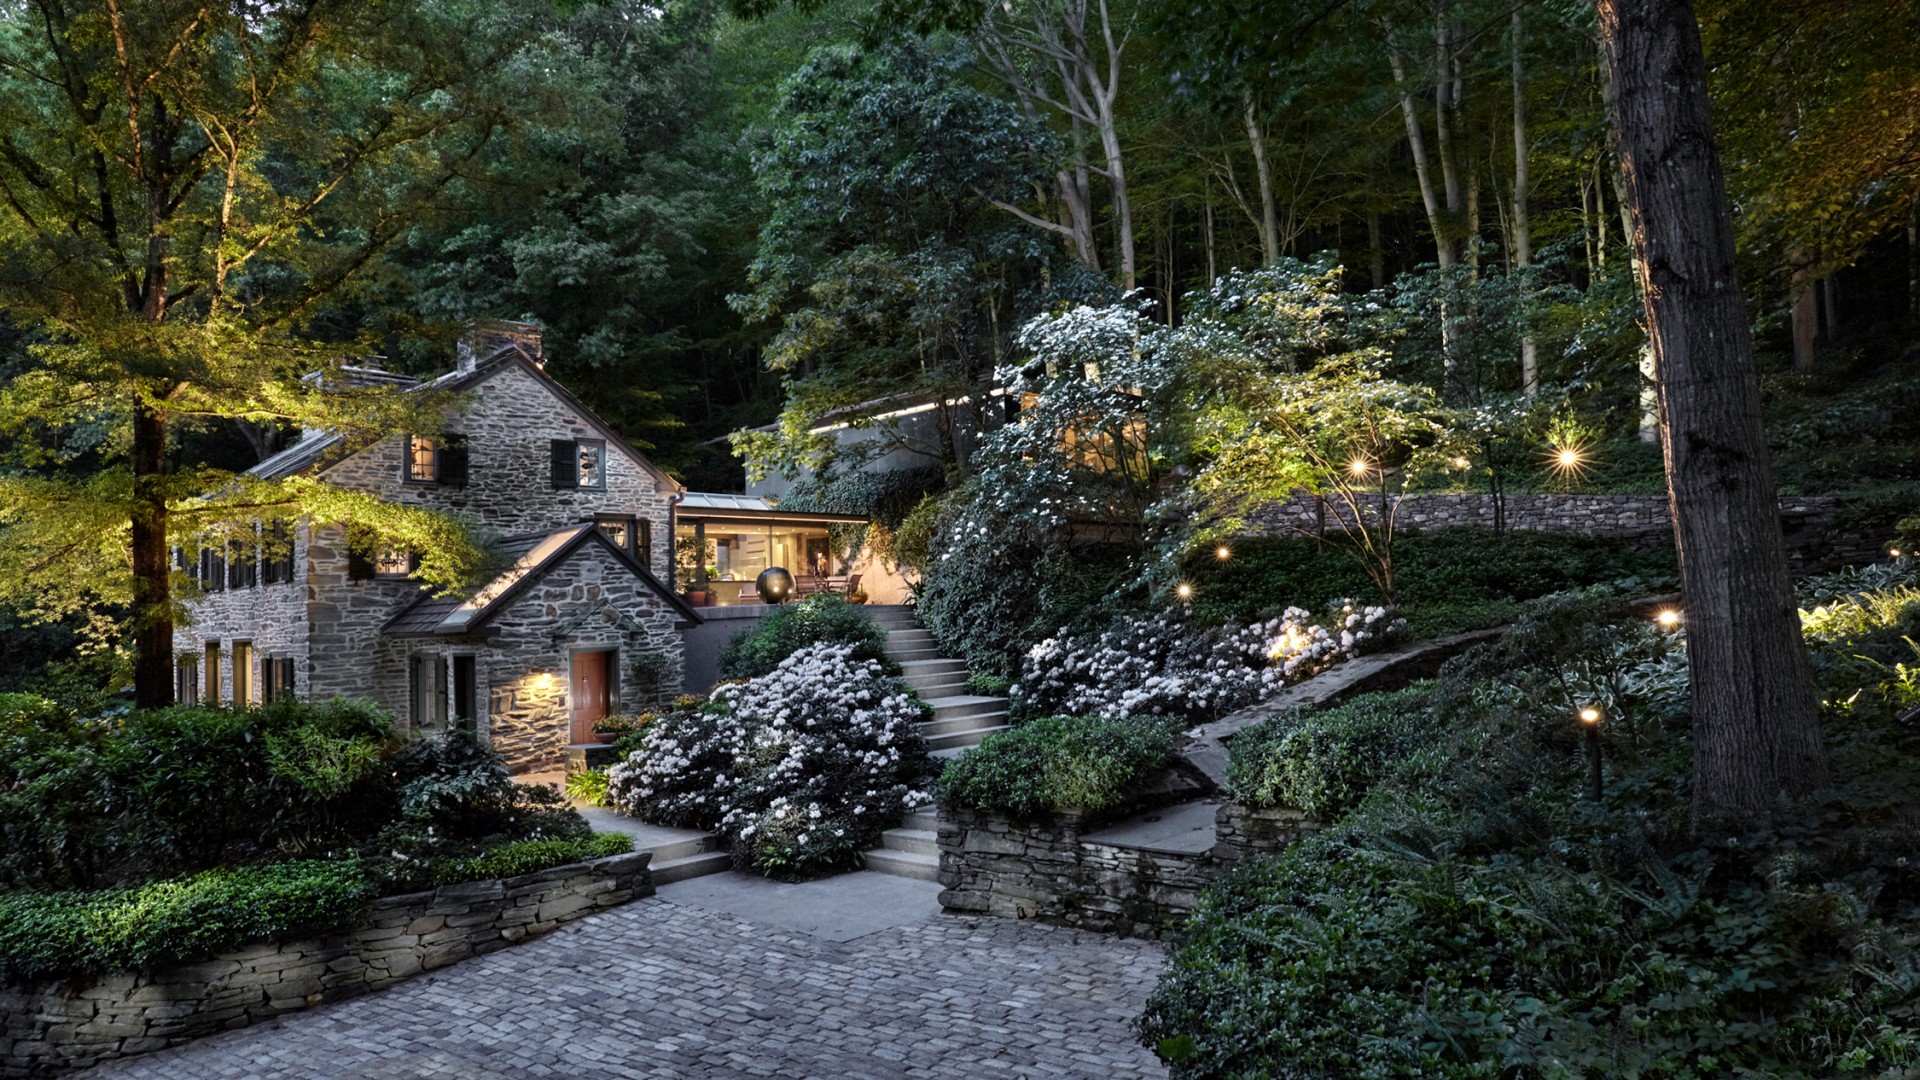 General 1920x1080 England UK cottage forest lights Yorkshire stones stairs flowers garden